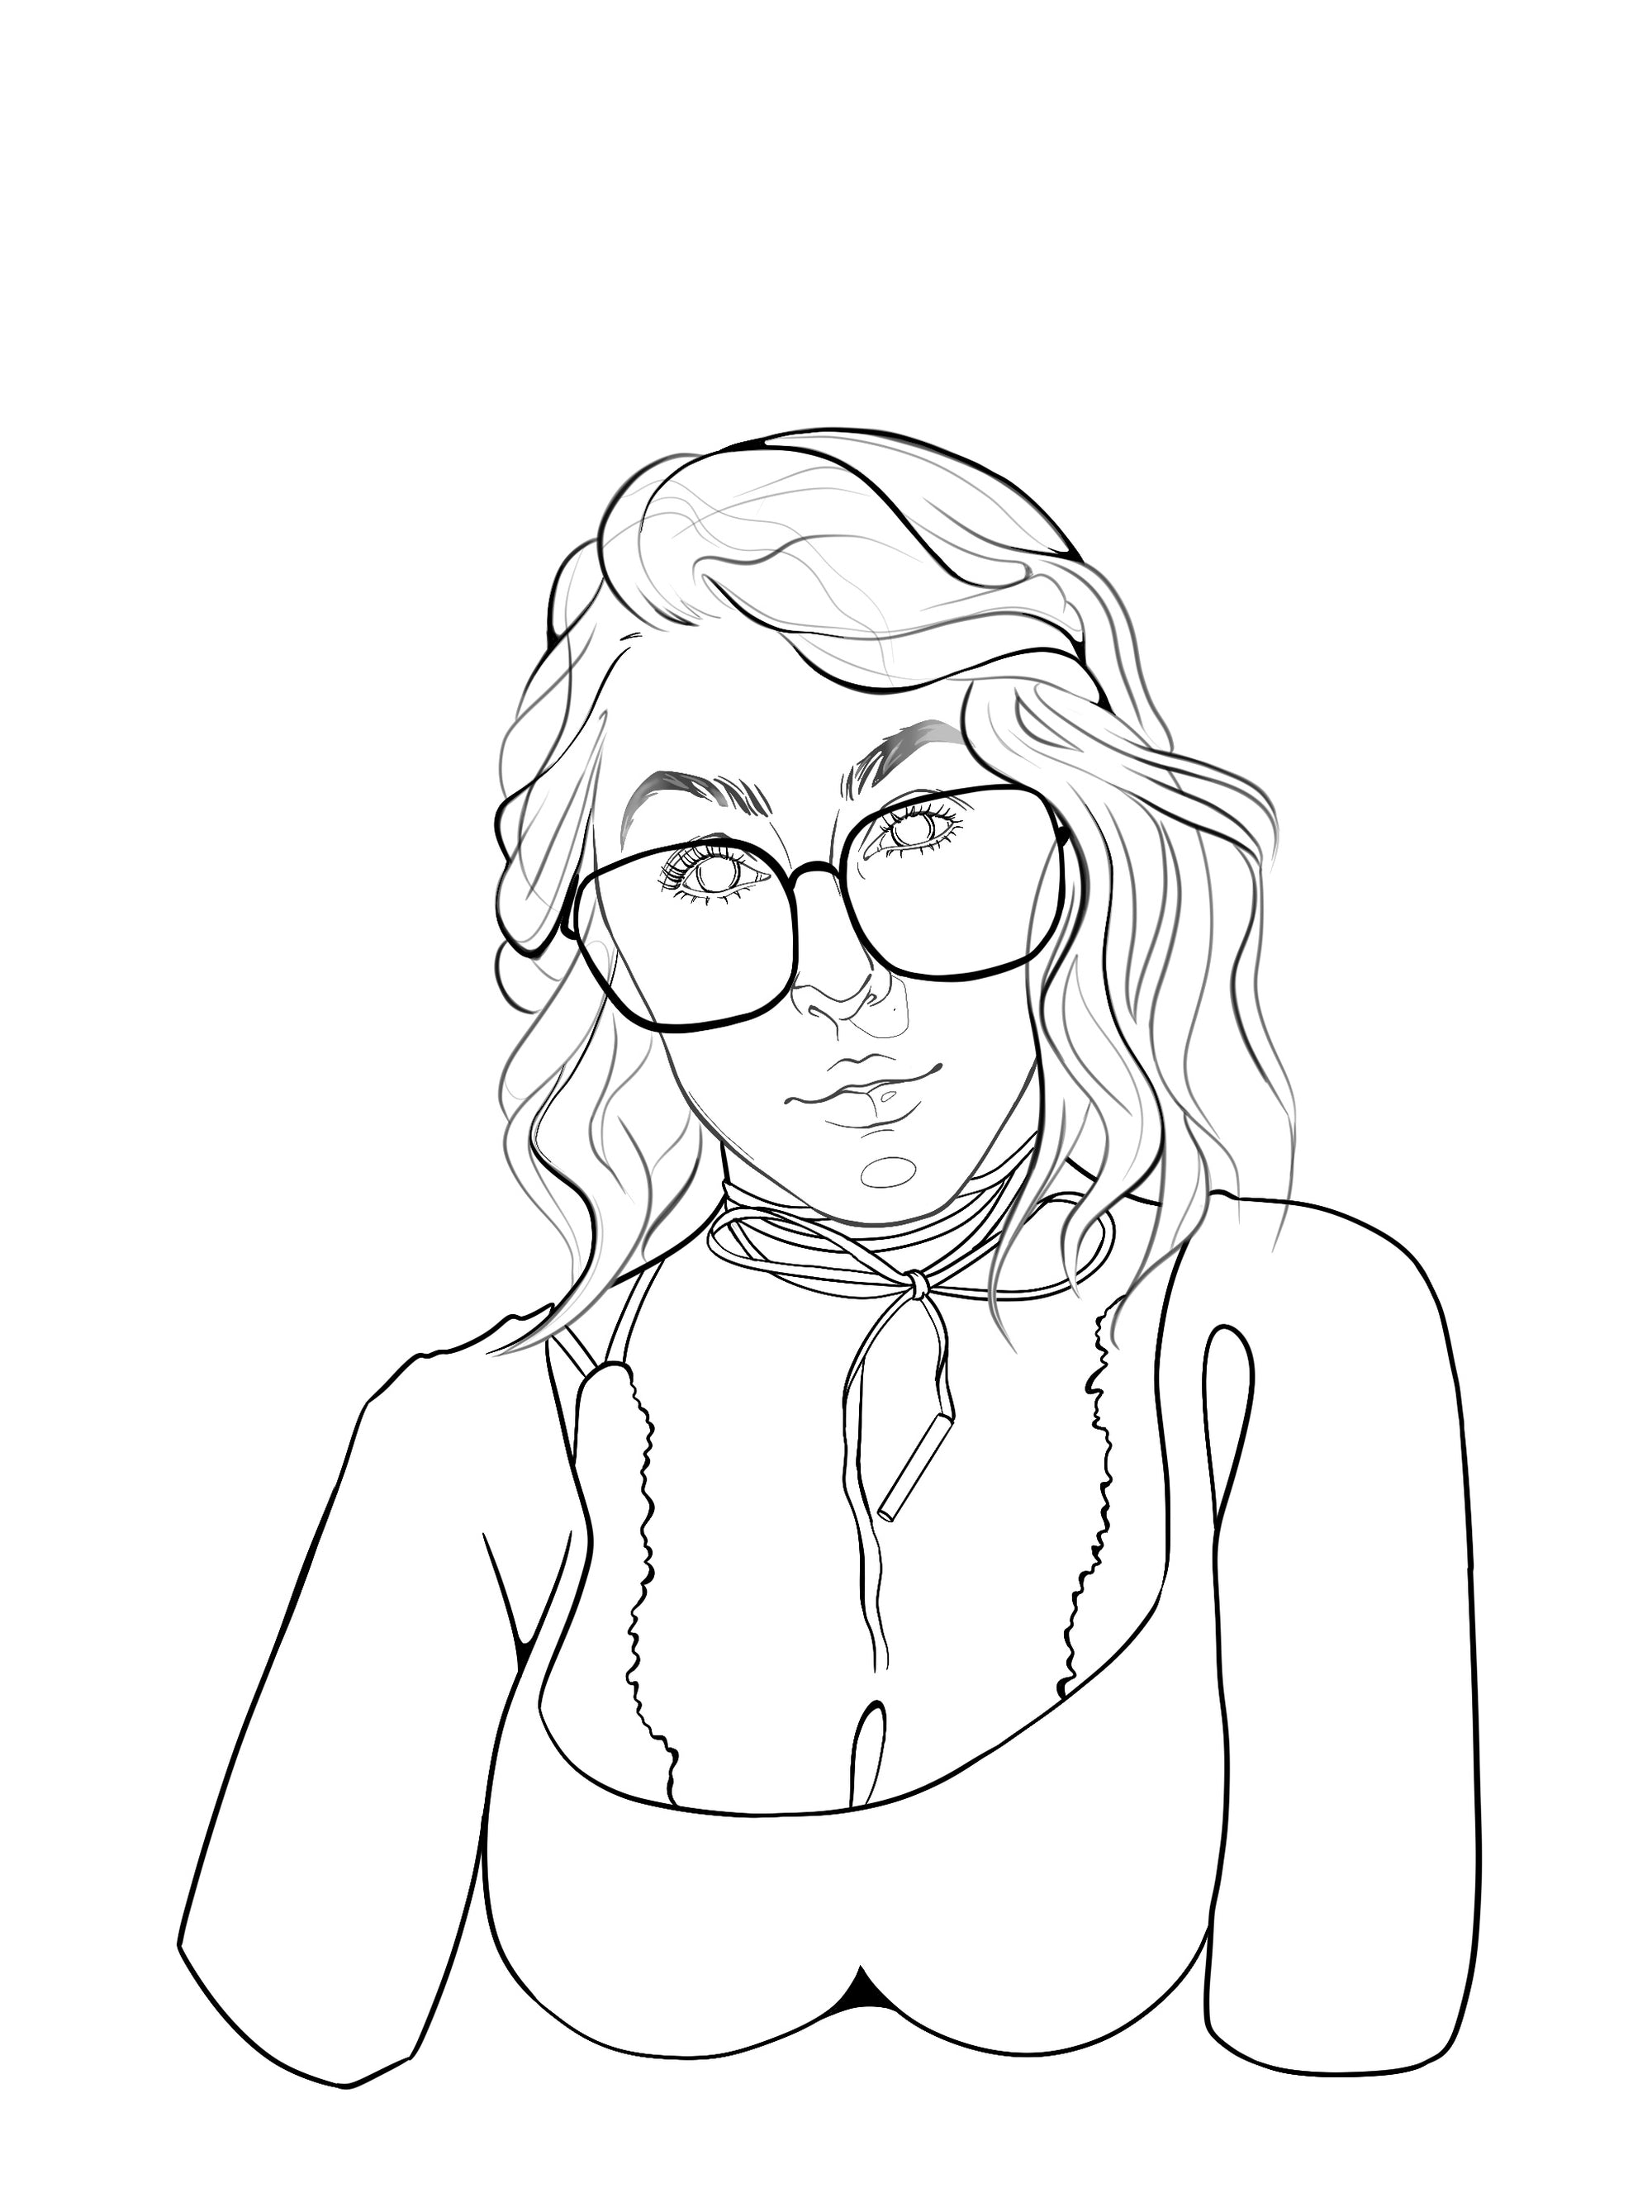 A black and white image of a digital line portrait of a woman with curly hair wearing glasses